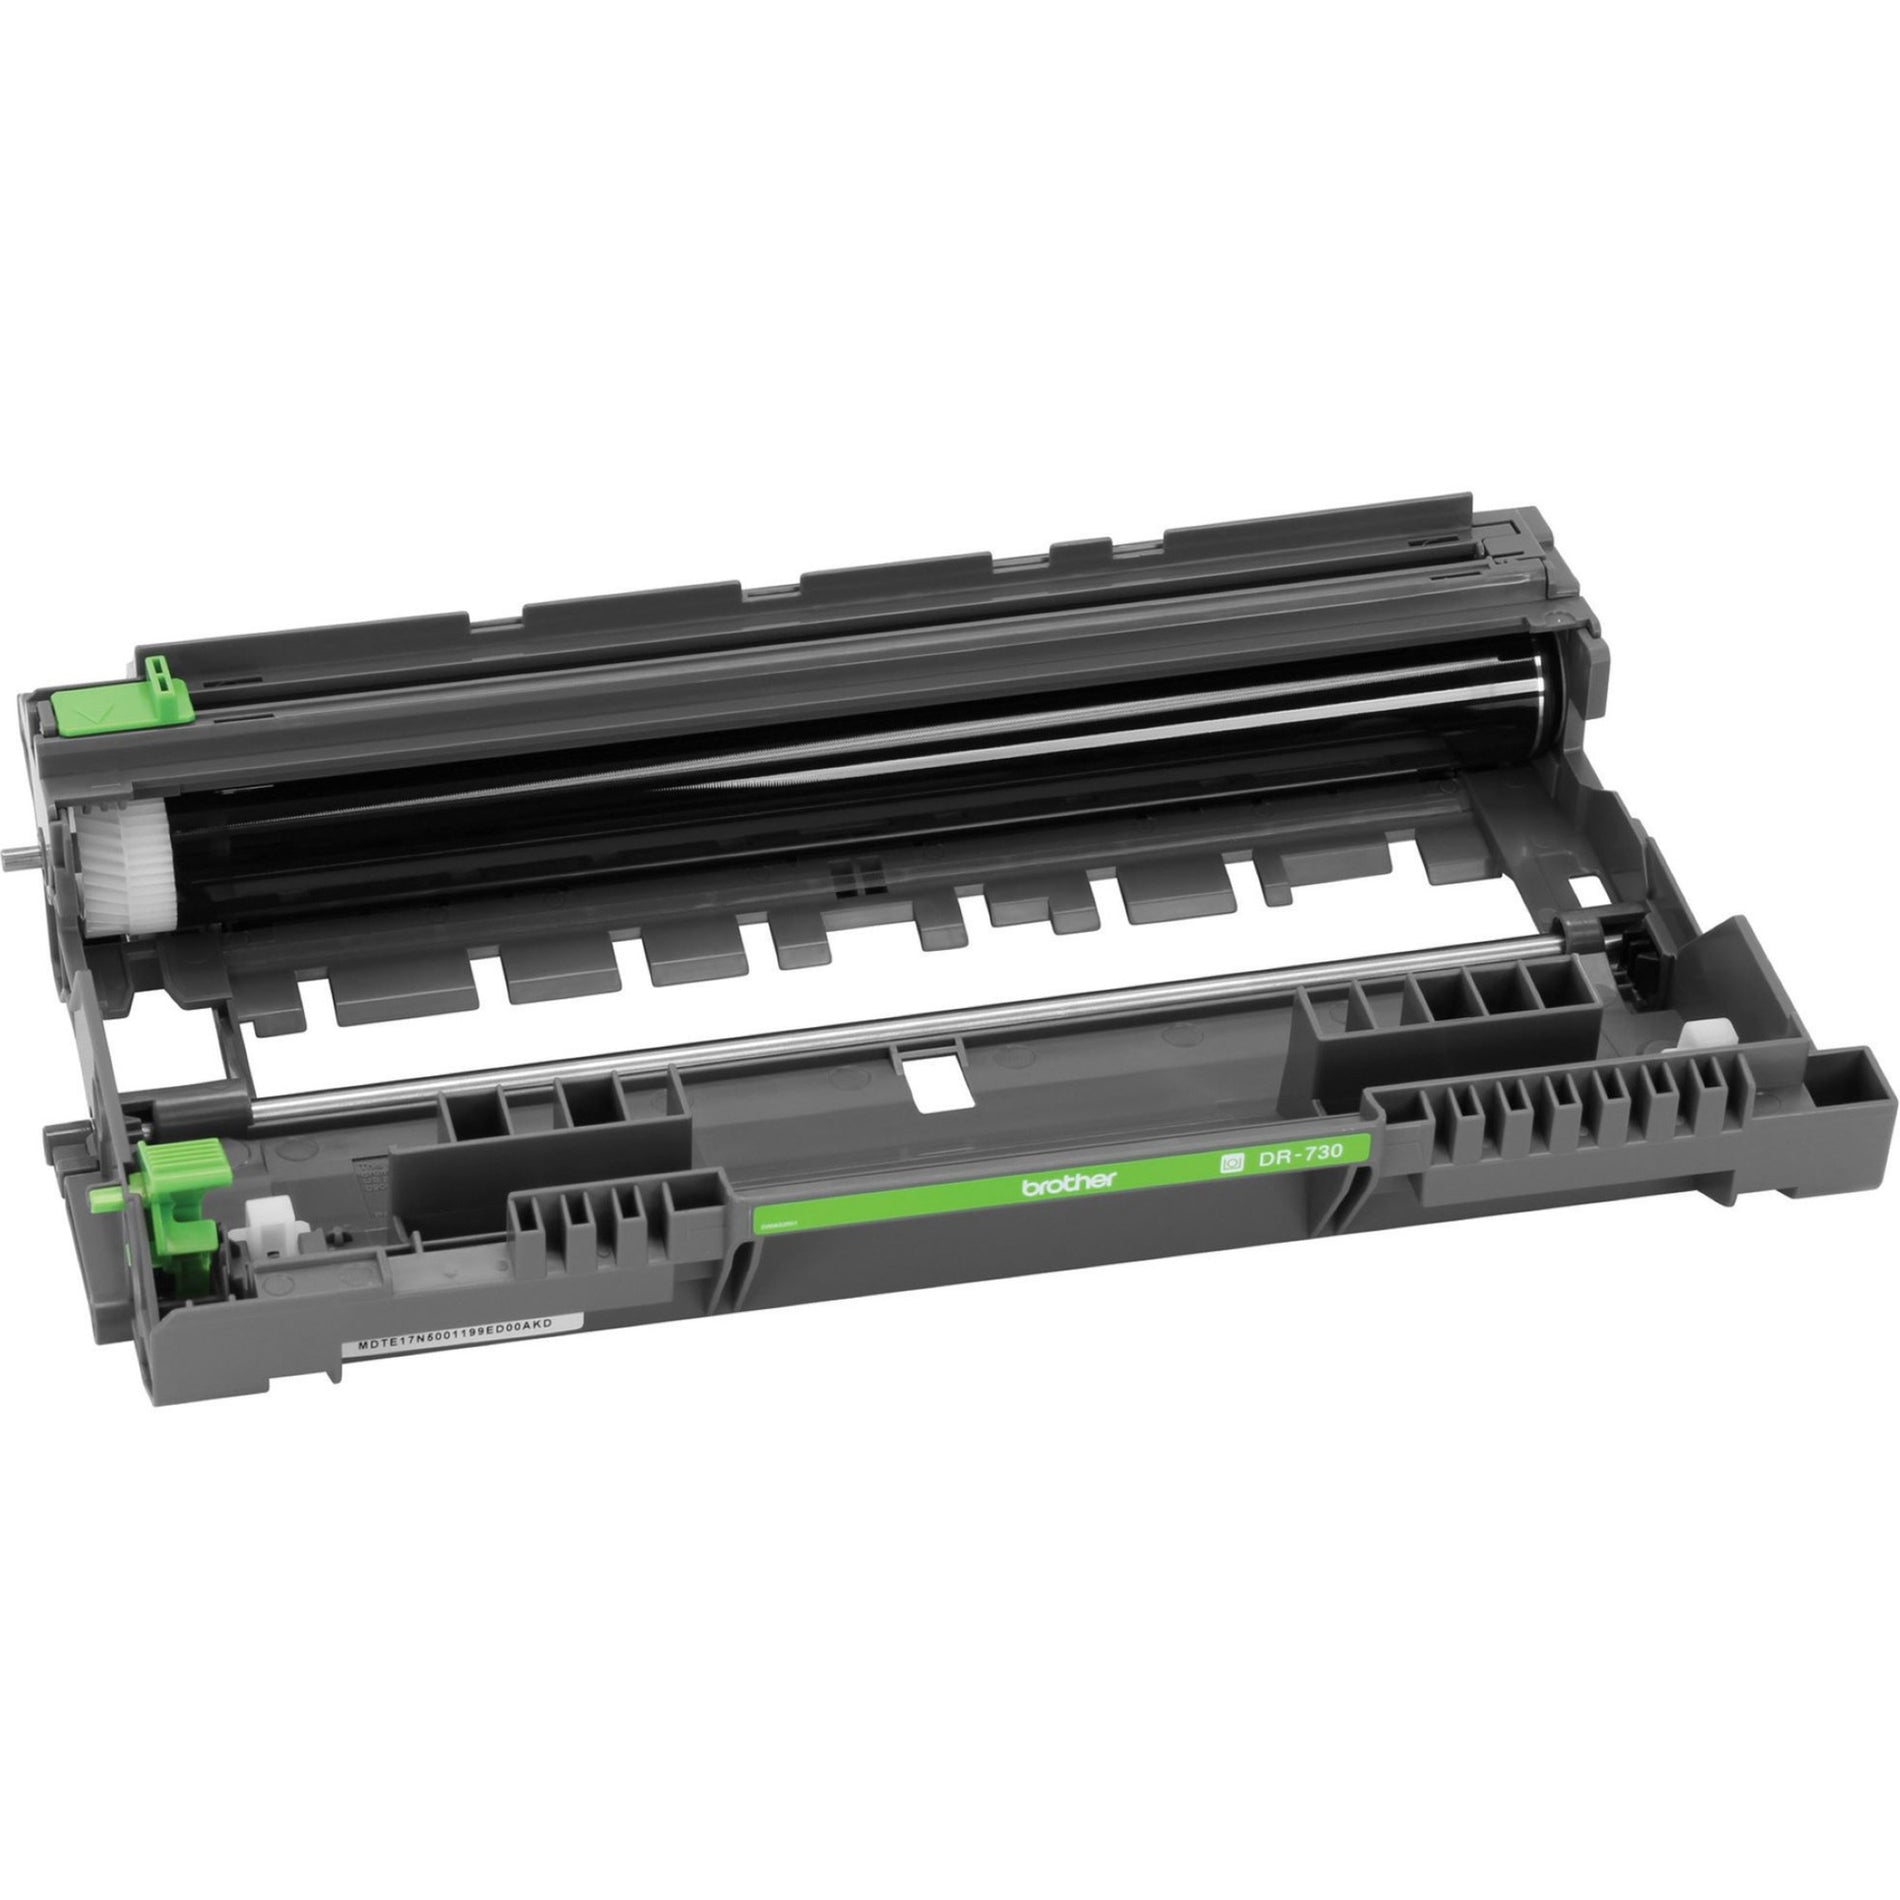 Brother DR-730 Drum Unit, 12,000 Page Yield, Black